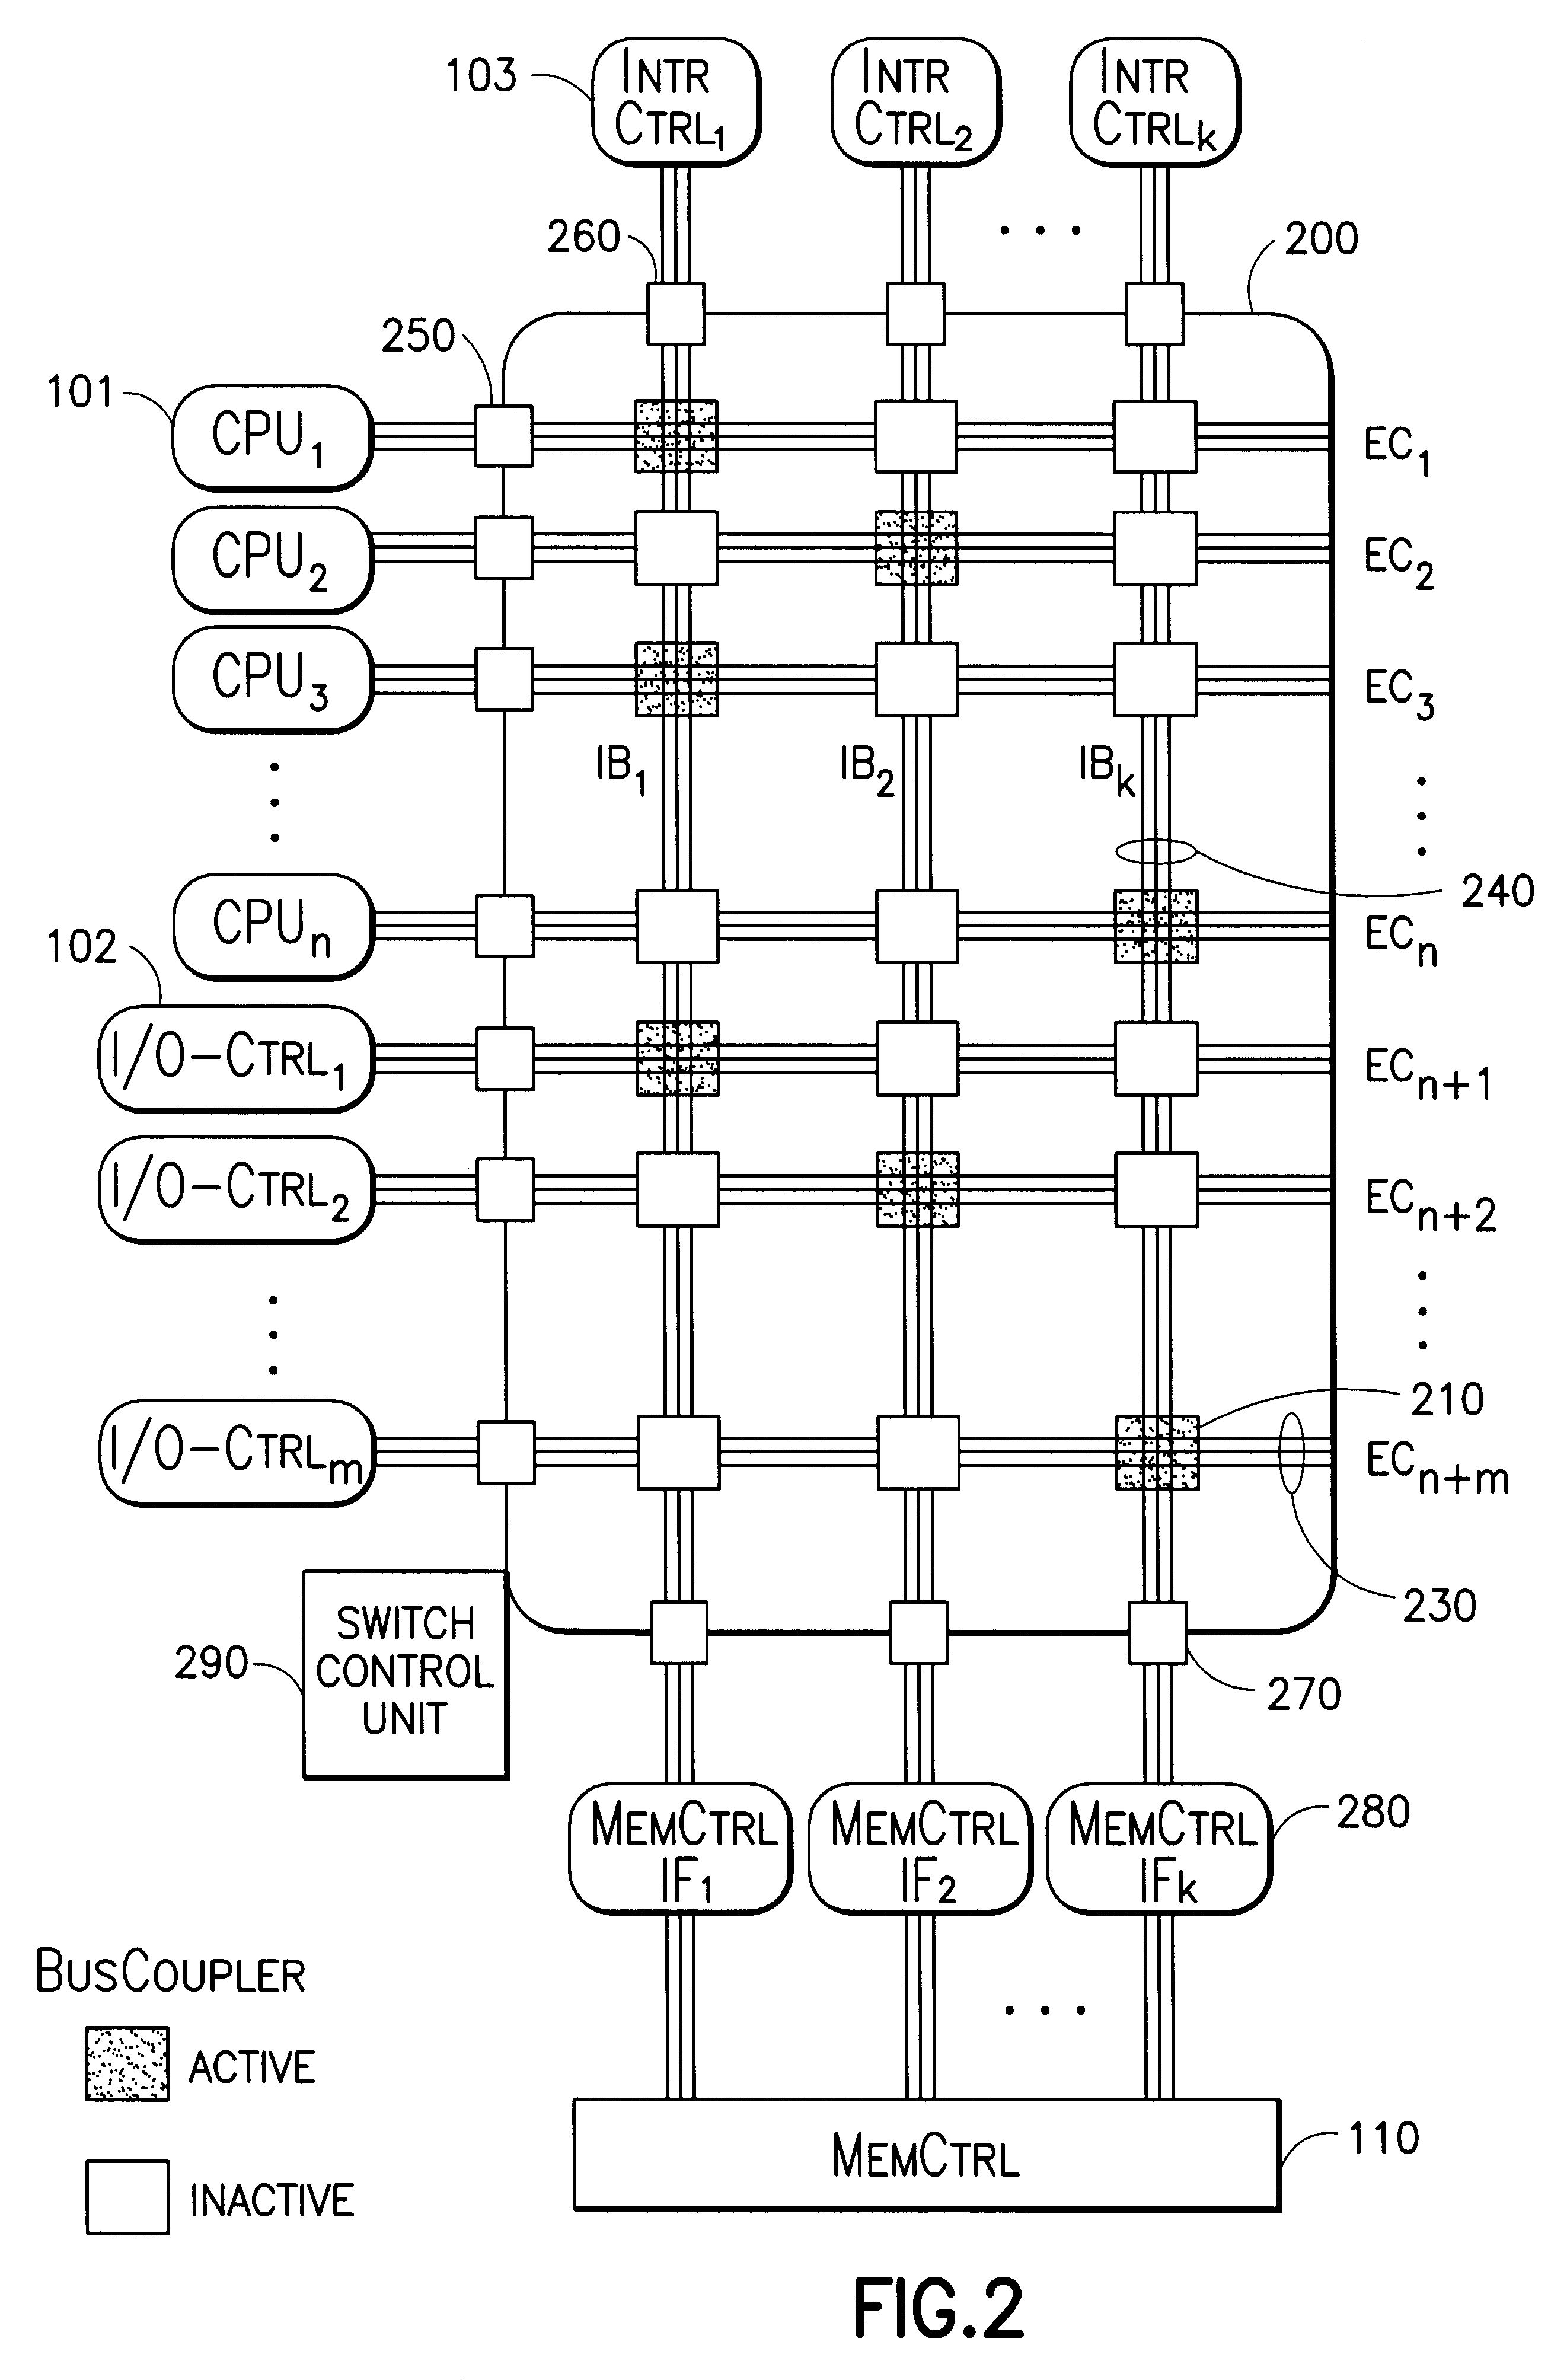 Secure partitioning of shared memory based multiprocessor system